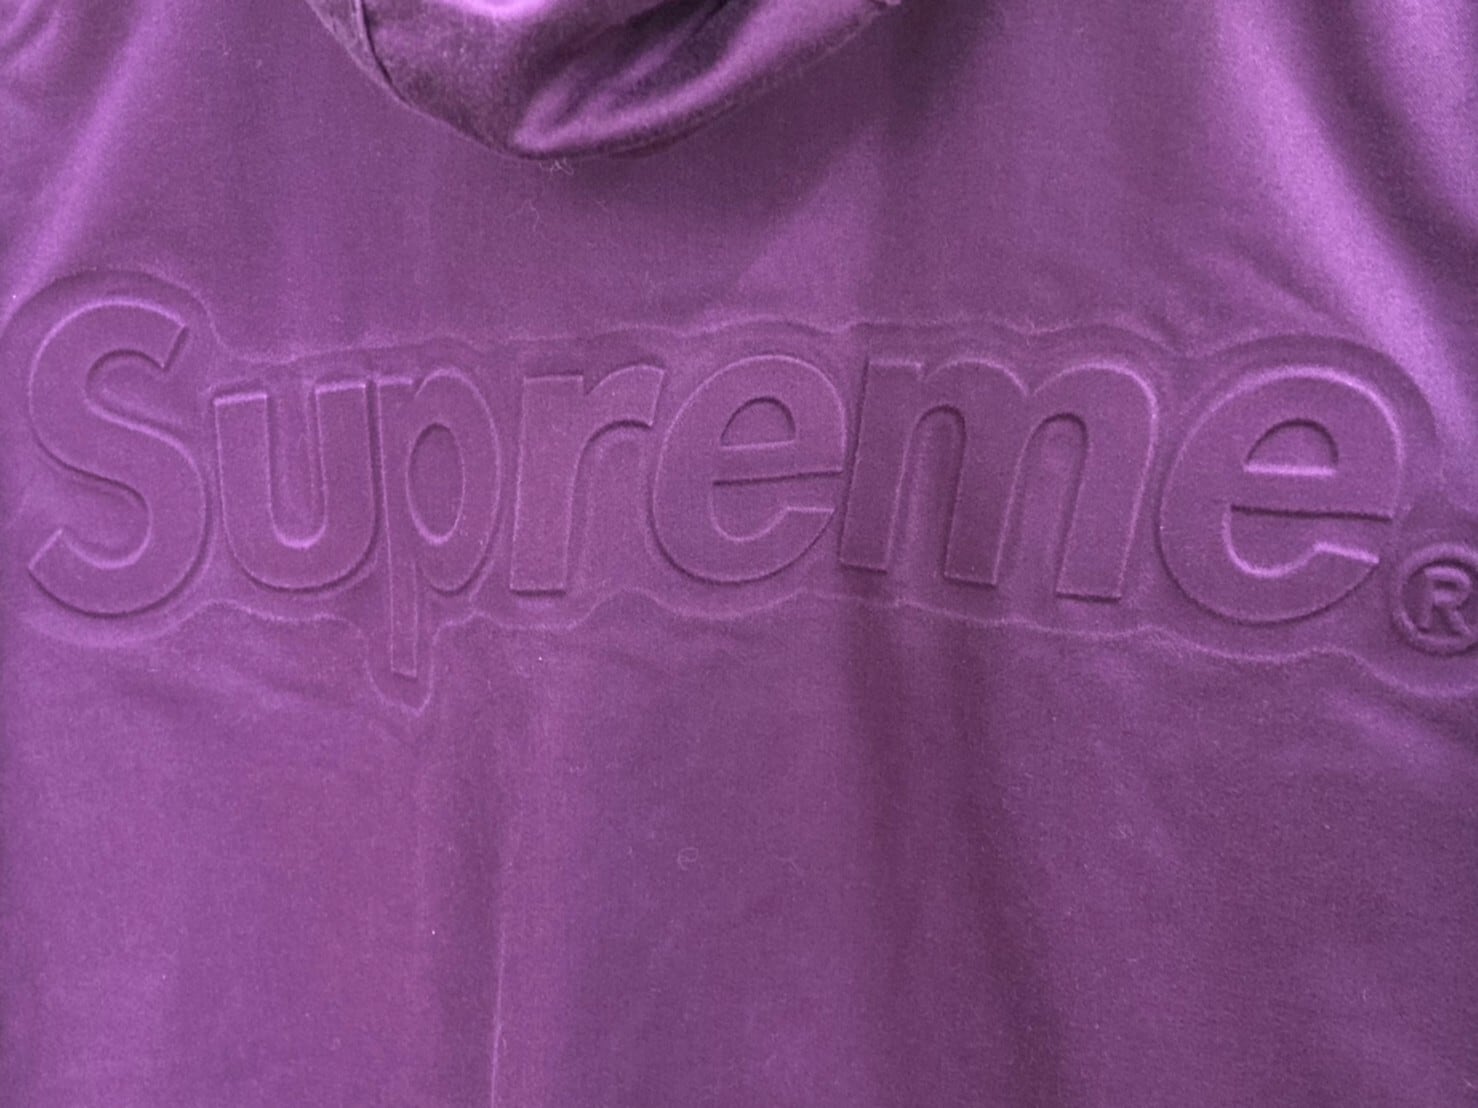 21SS Supreme Hooded Facemask Parka XL